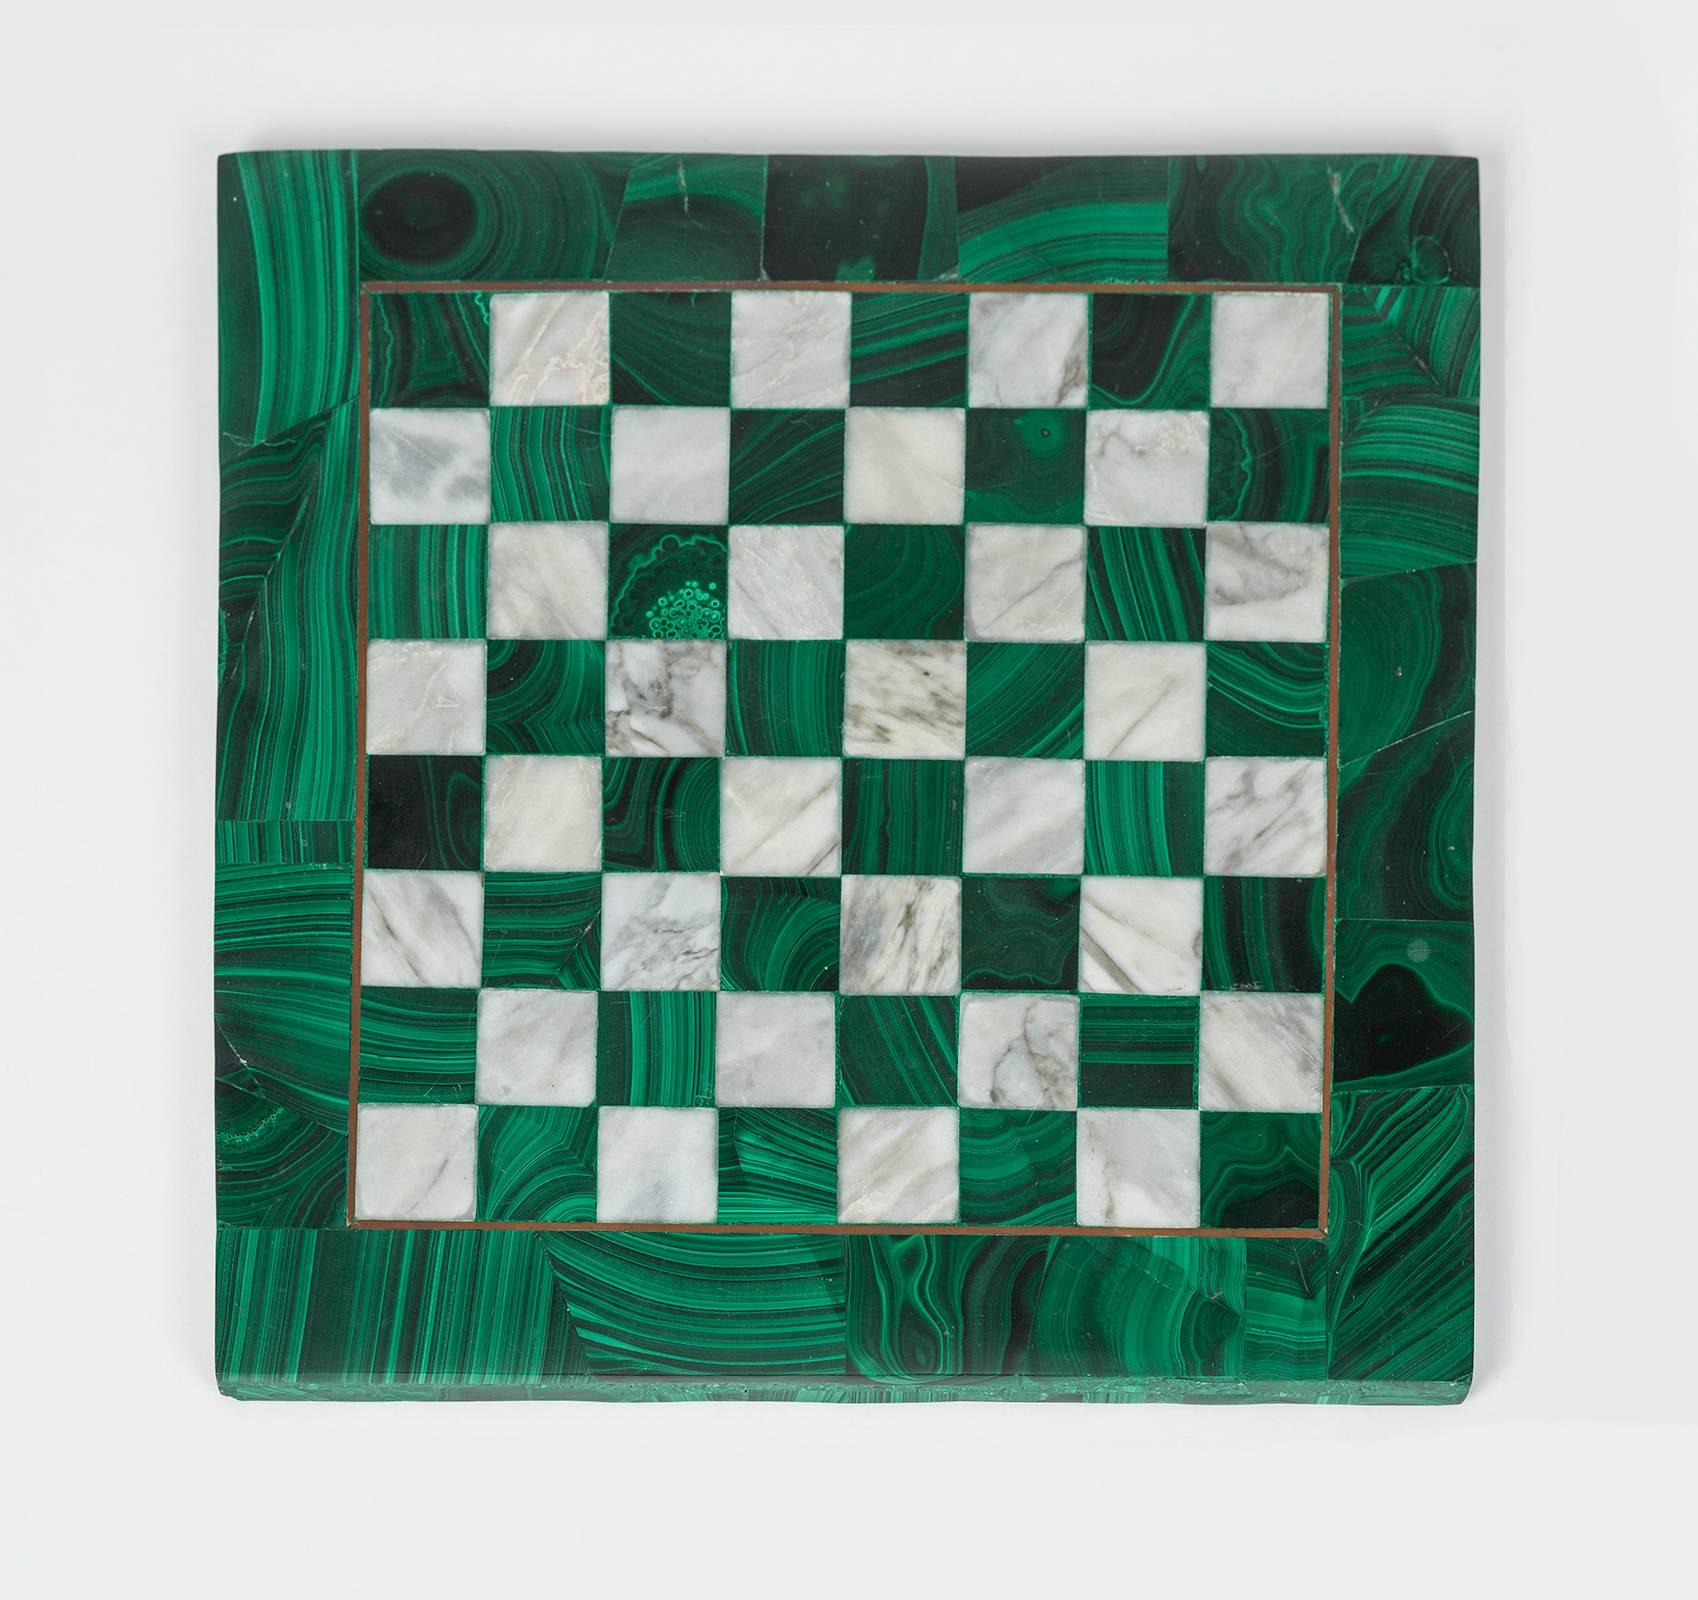 Vintage, 1950s. 14" square chess board made of beautiful green malachite stone contrasted with light gray marble stone. Bordered between with brass liner. In excellent condition.